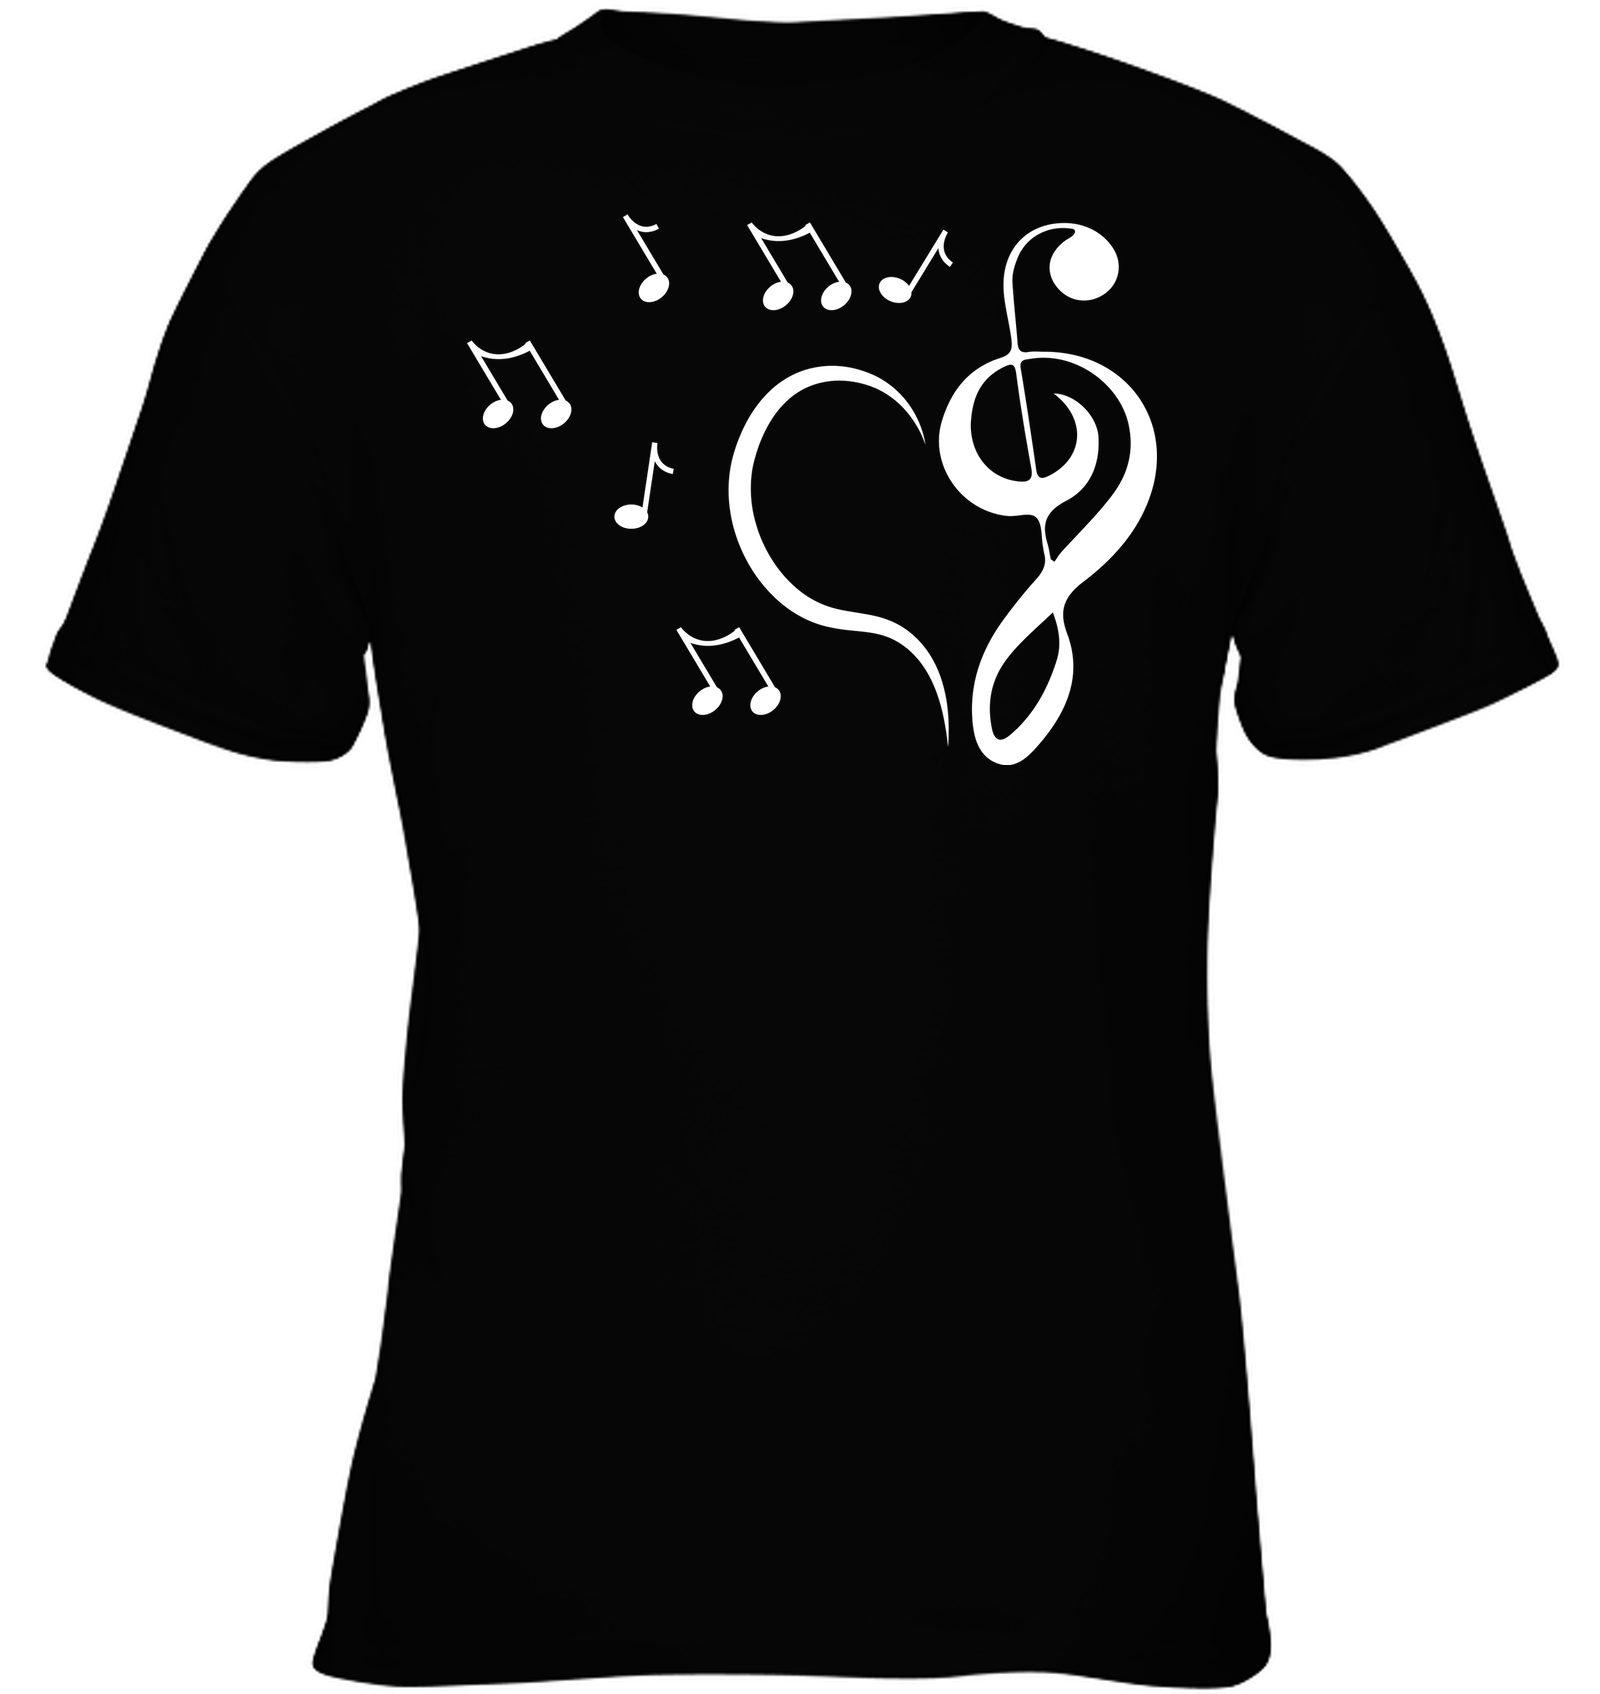 Musical heart with floating notes - Gildan Youth Short Sleeve T-Shirt